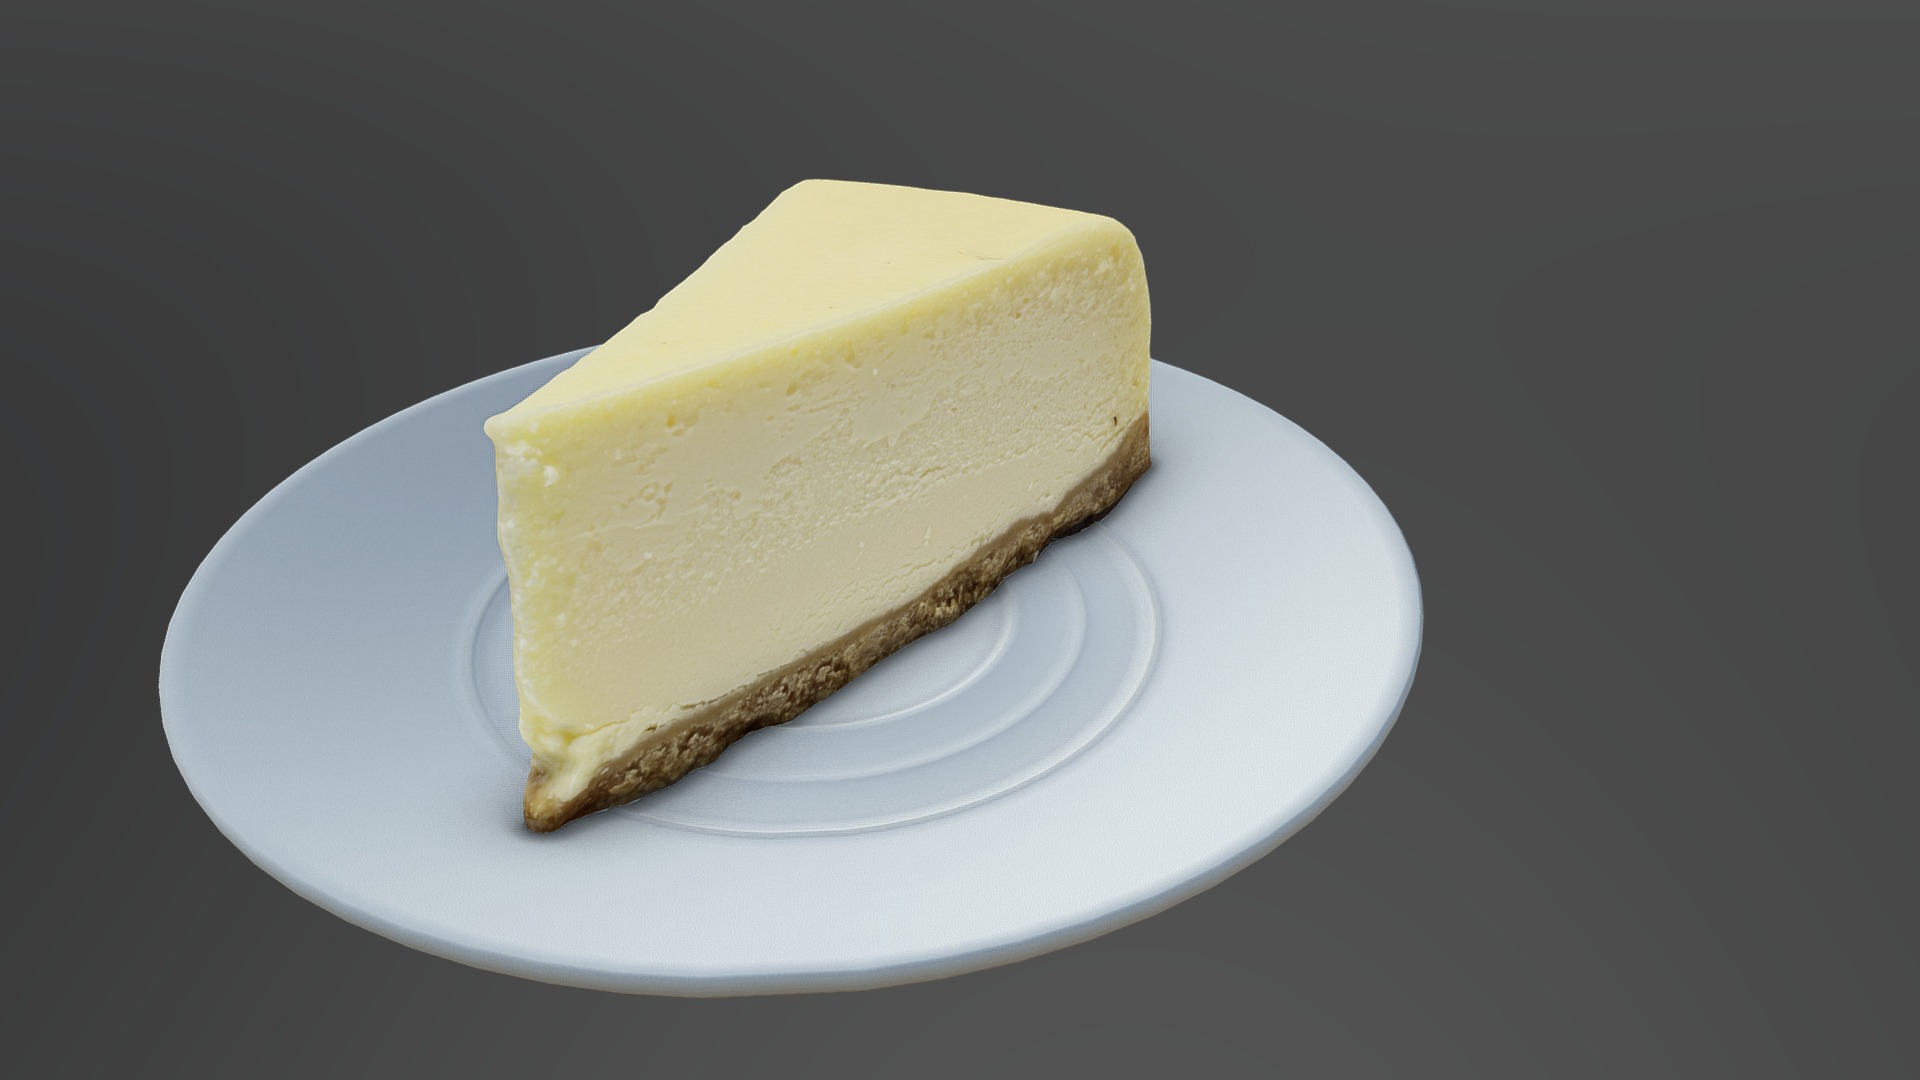 3D model 9PIG - This is a 3D model of the 9PIG. The 3D model is about a slice of cheesecake on a plate.